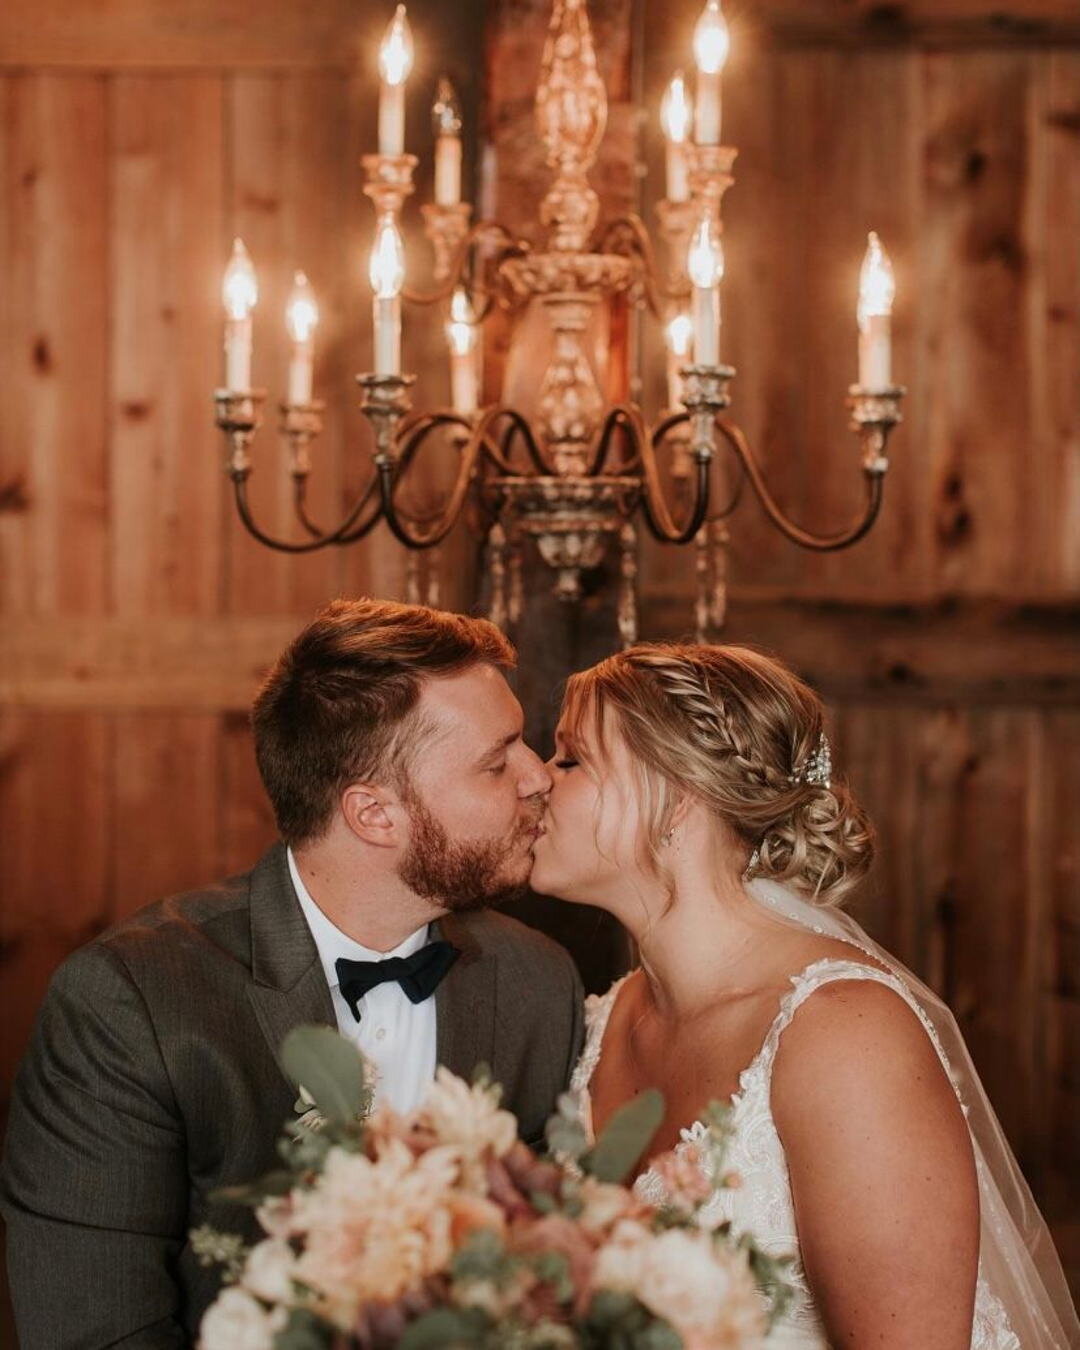 We absolutely just love the glow.🤵 👰 

🥂Double tap if you do too.💕

@erickamaephotography
@gardenview_flowers
@lucilles_bbq

#fortwaynevenue
#fortwayneweddings
#northwestohioweddings
#northwestohiobarnvenue

https://buff.ly/35Q9ji1